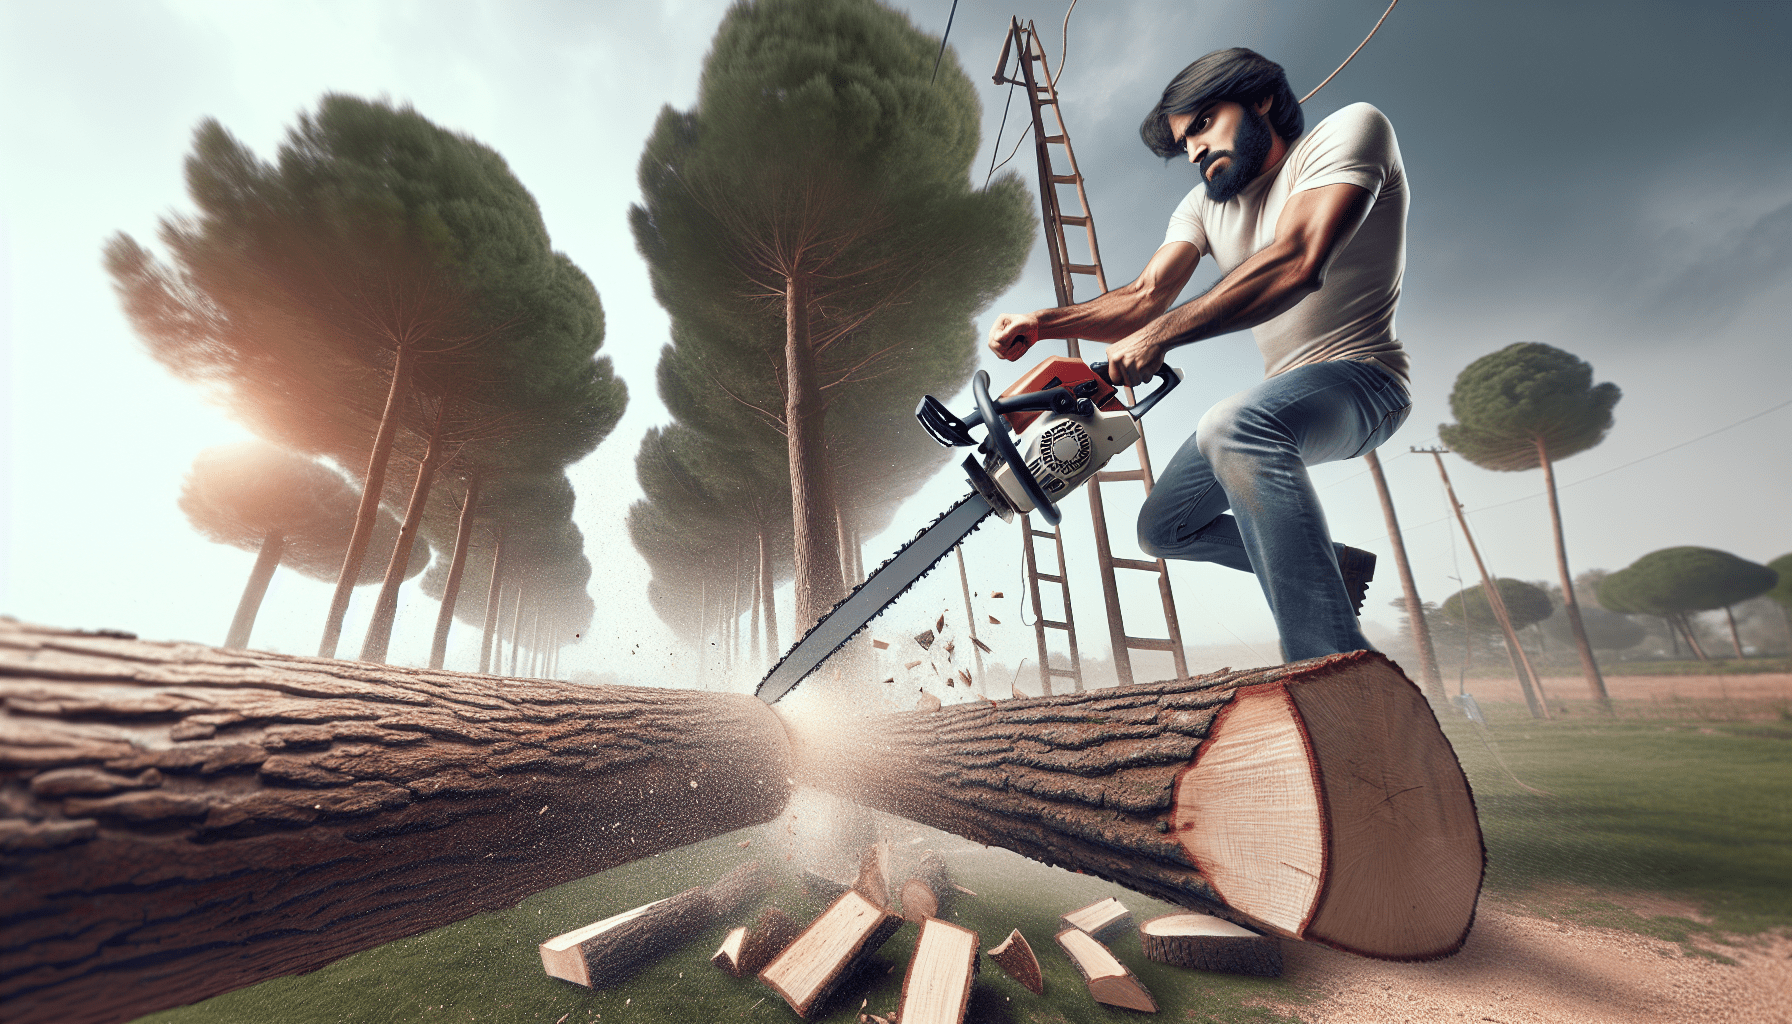 Can You Use A Pole Saw To Cut Logs?